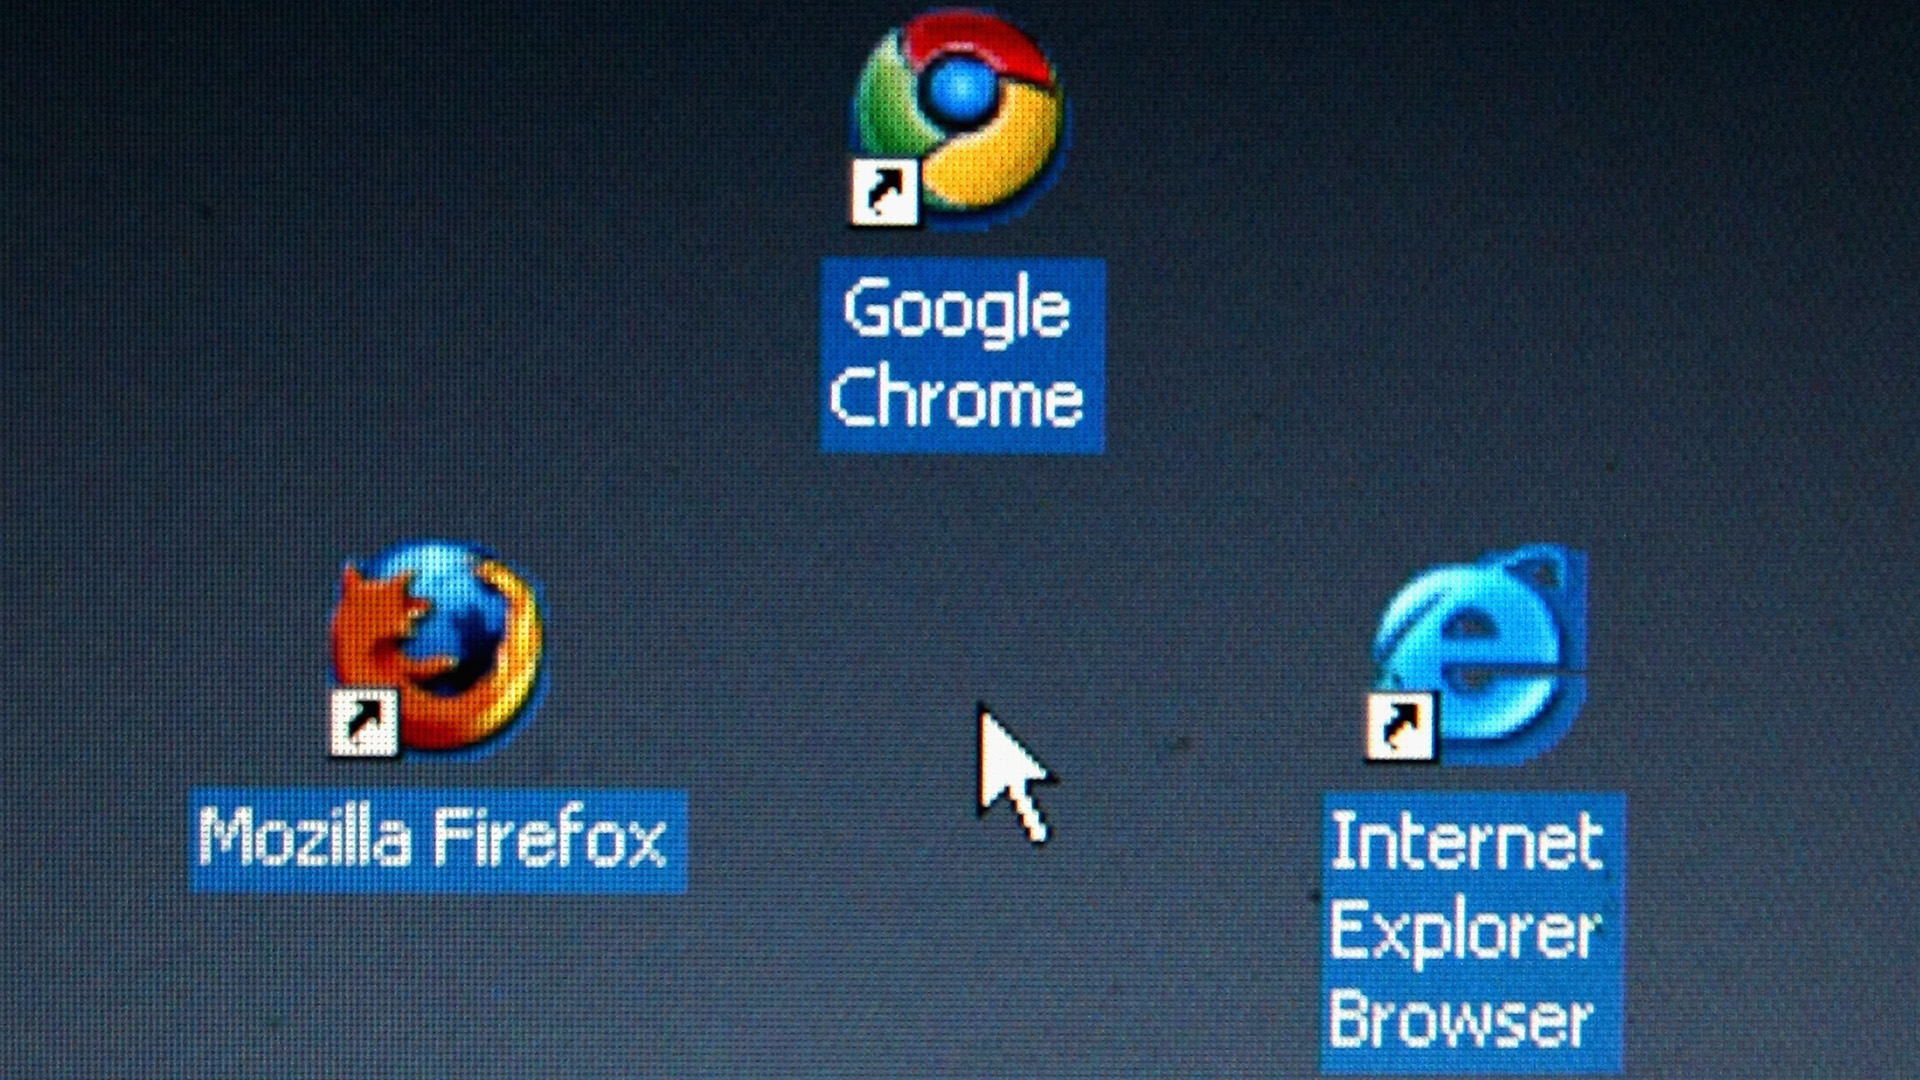  No seriously, Internet Explorer really is being retired on June 15, warns Microsoft 